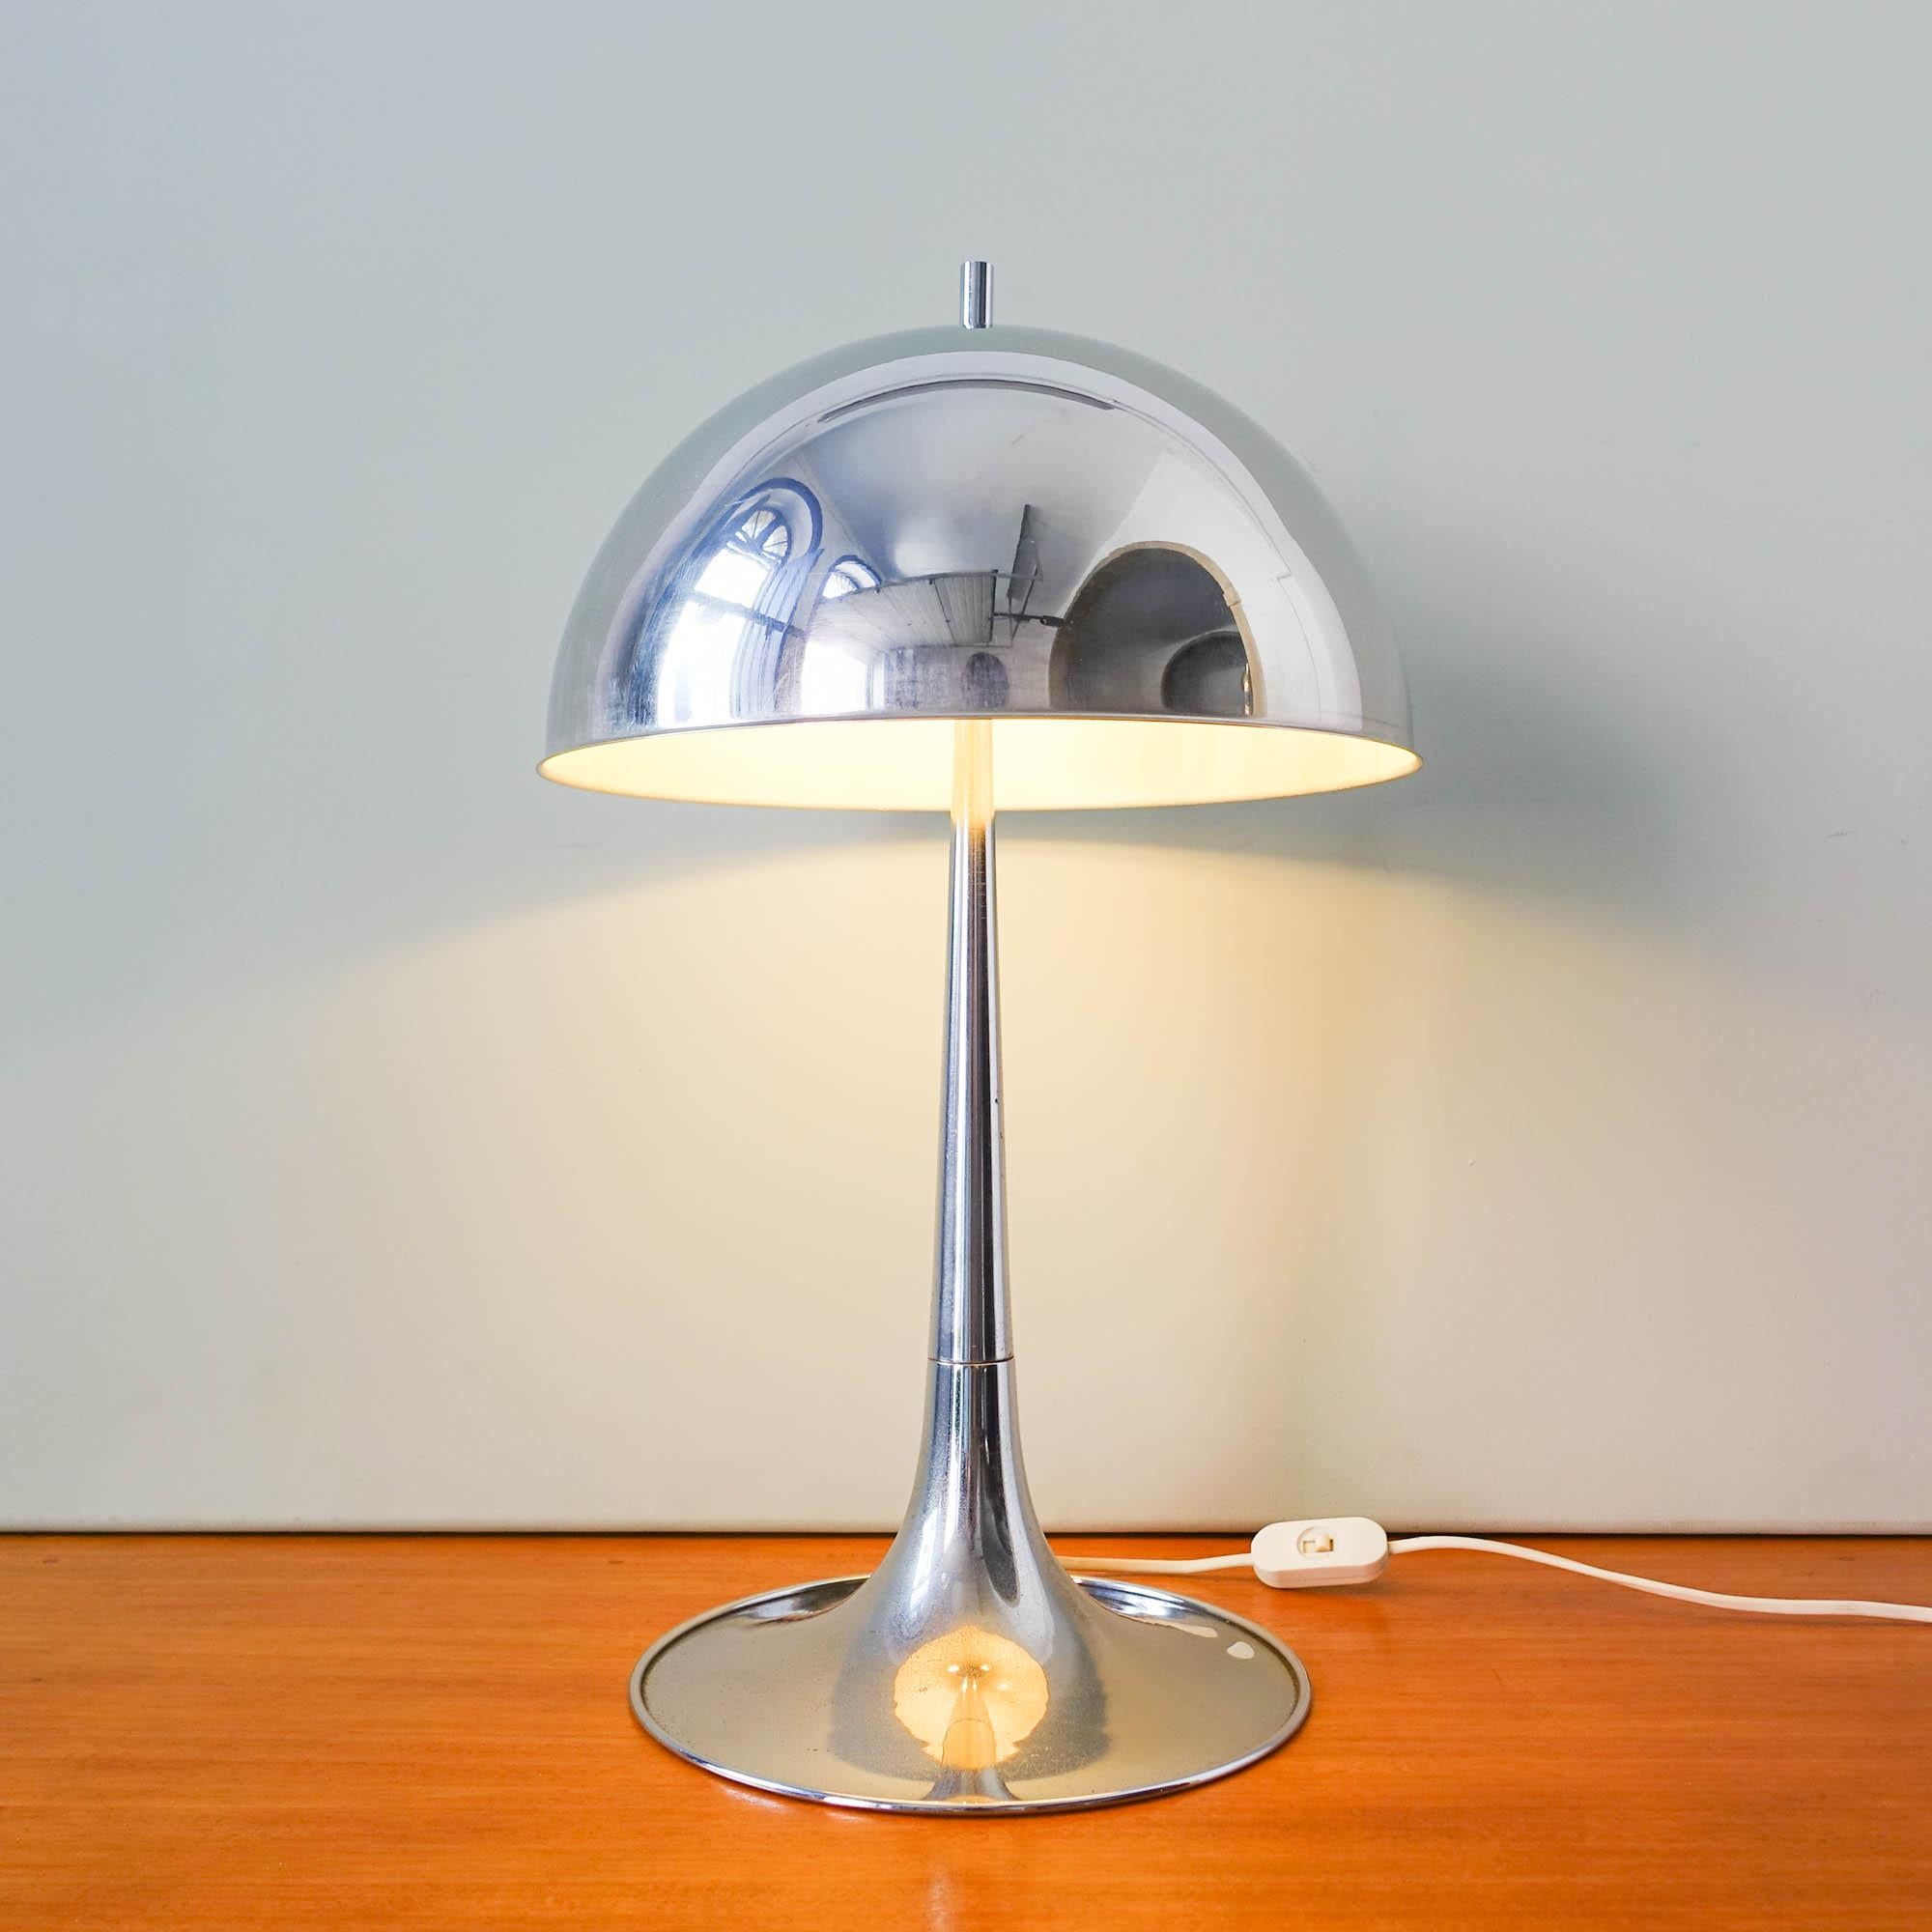 This table lamp was designed bu Goffredo Reggiani for Reggiani, in Italy, during the 1960's. It is a chromed metal lamp with a mushroom shade and a trumpet base. With the original tag from the producer. In original and good condition.